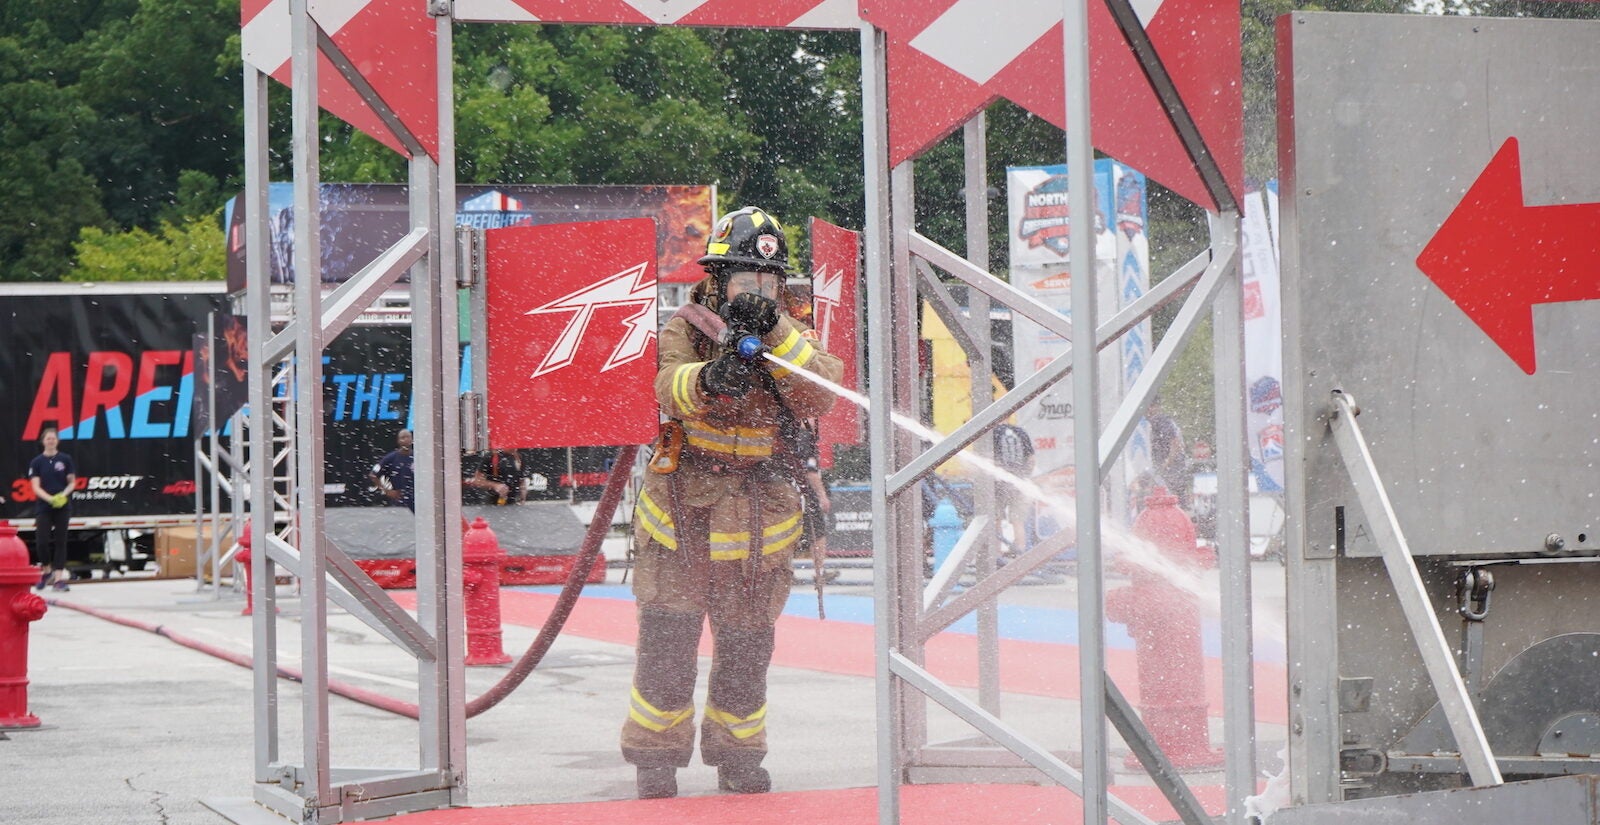 A firefighter holding a fire hose blasting out water